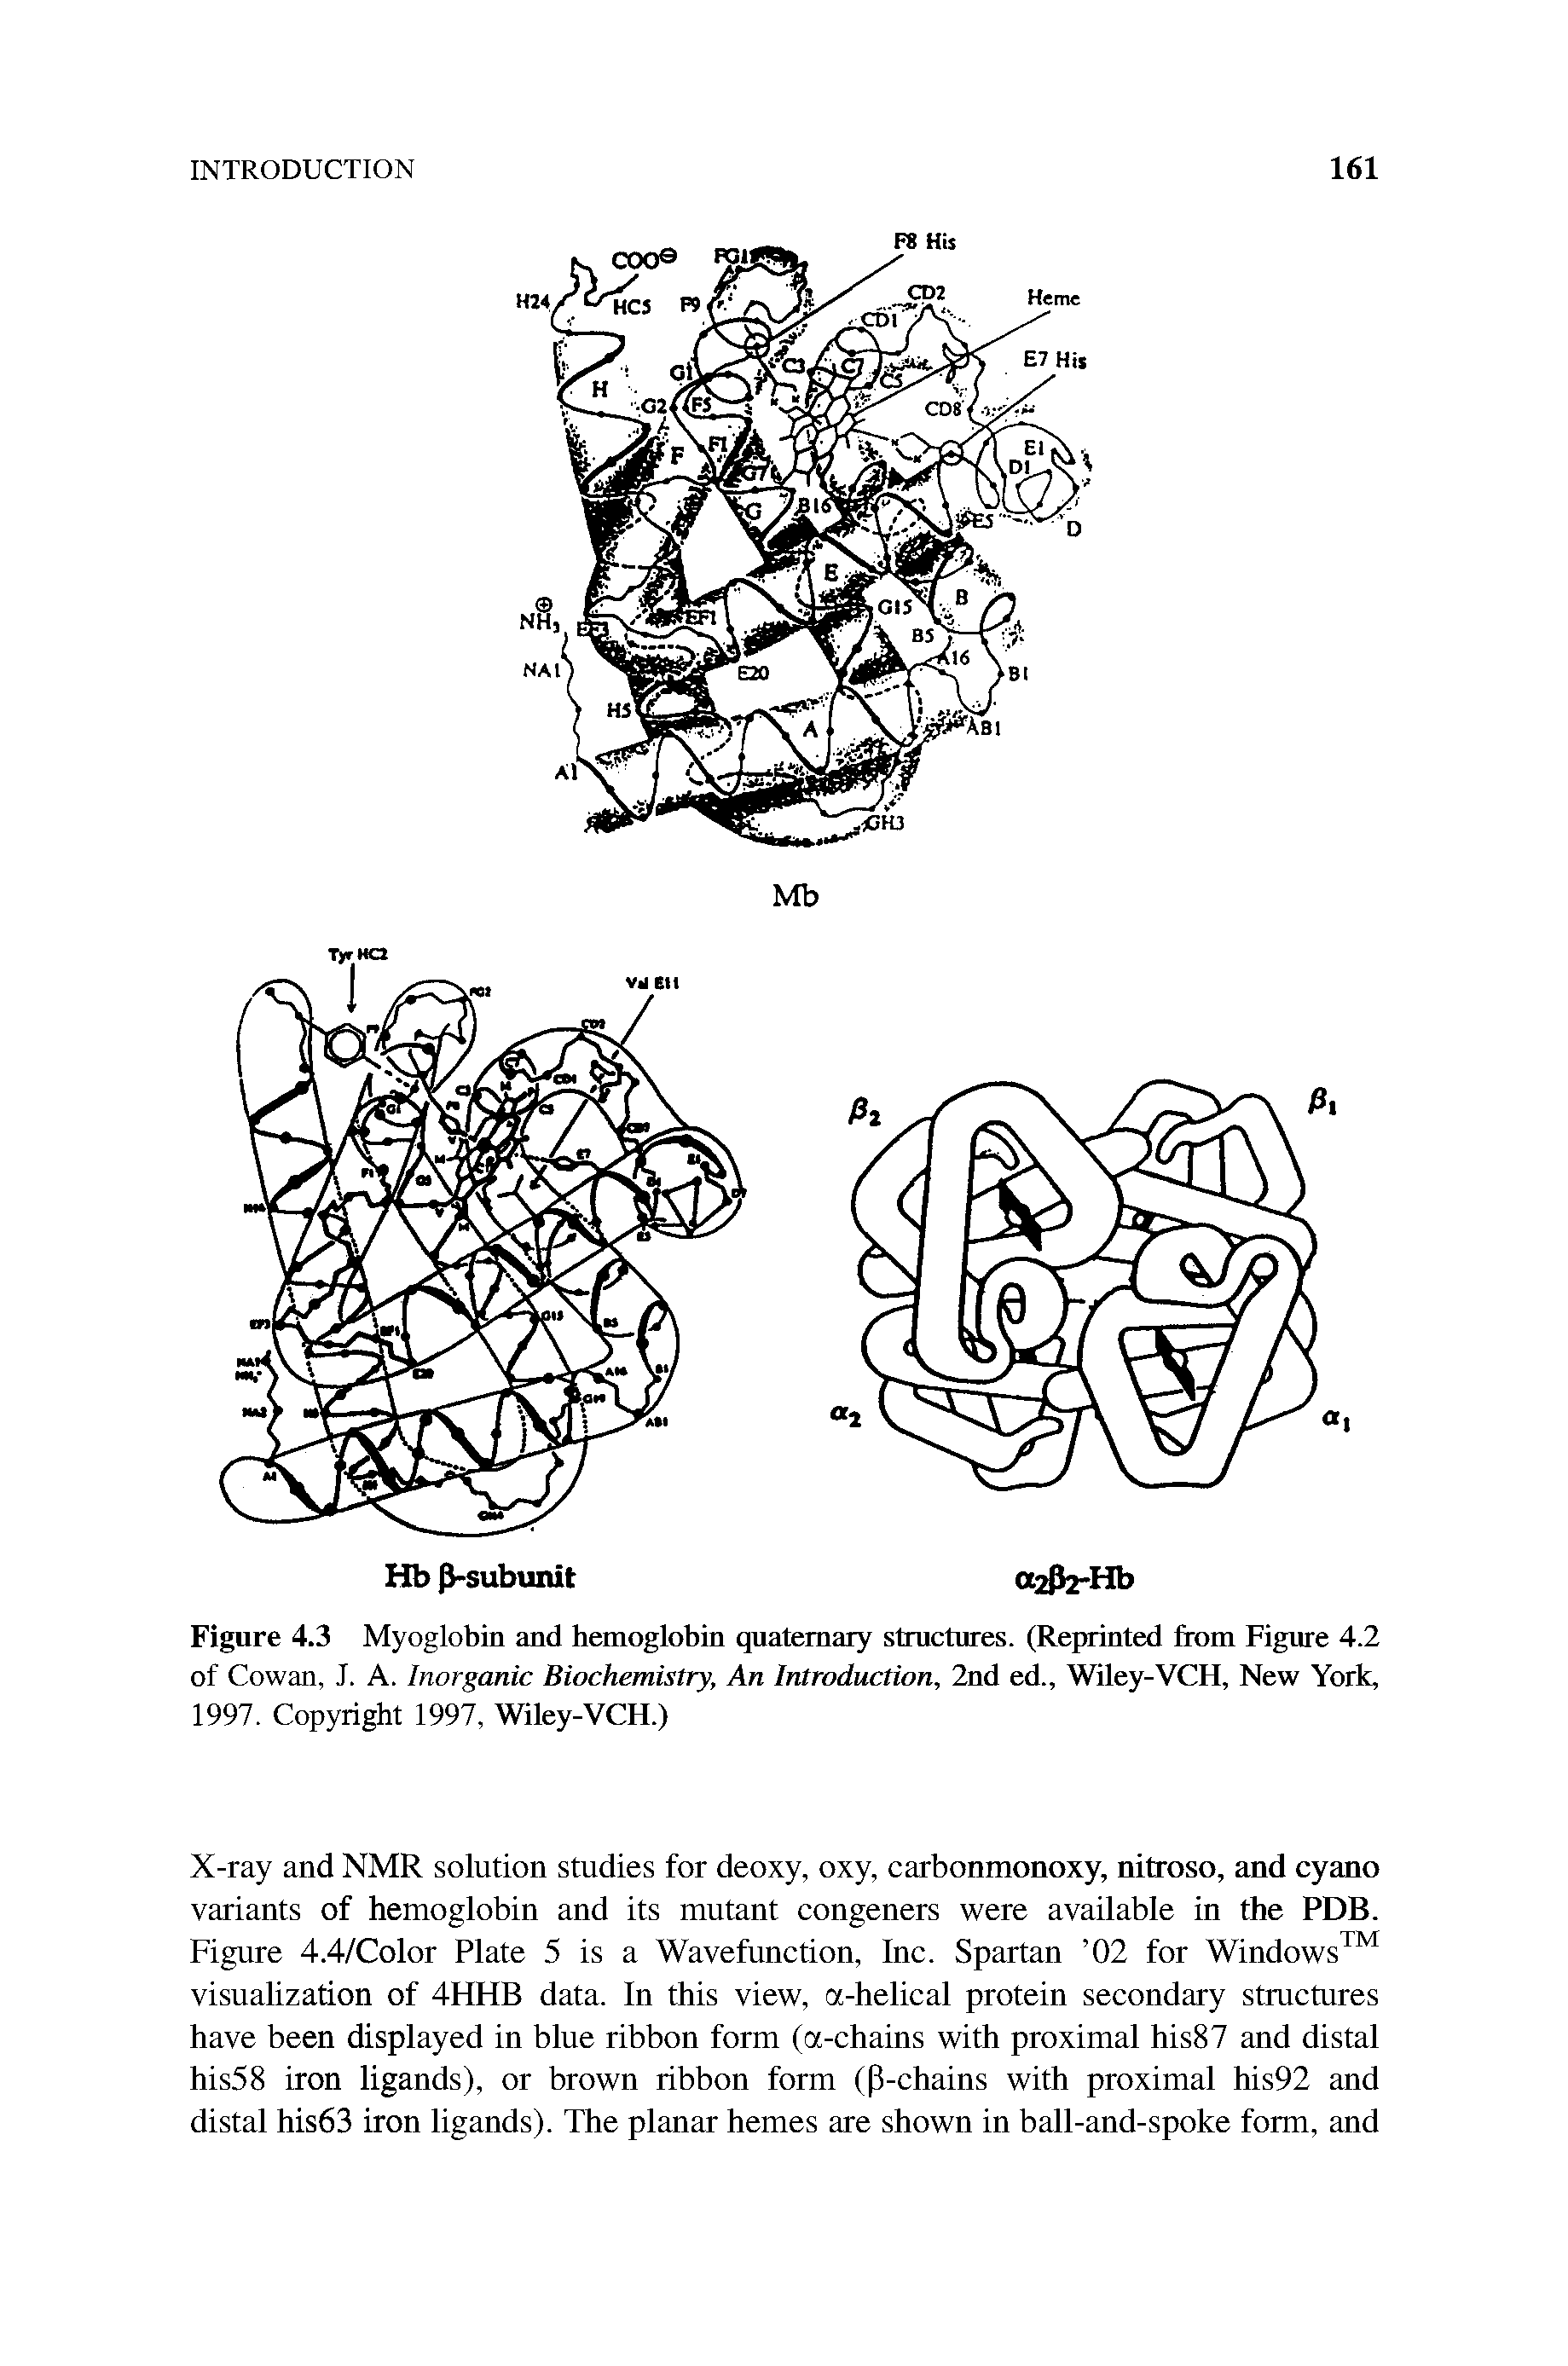 Figure 4.3 Myoglobin and hemoglobin quaternary structures. (Reprinted from Figure 4.2 of Cowan, J. A. Inorganic Biochemistry, An Introduction, 2nd ed., Wiley-VCH, New York, 1997. Copyright 1997, Wiley-VCH.)...